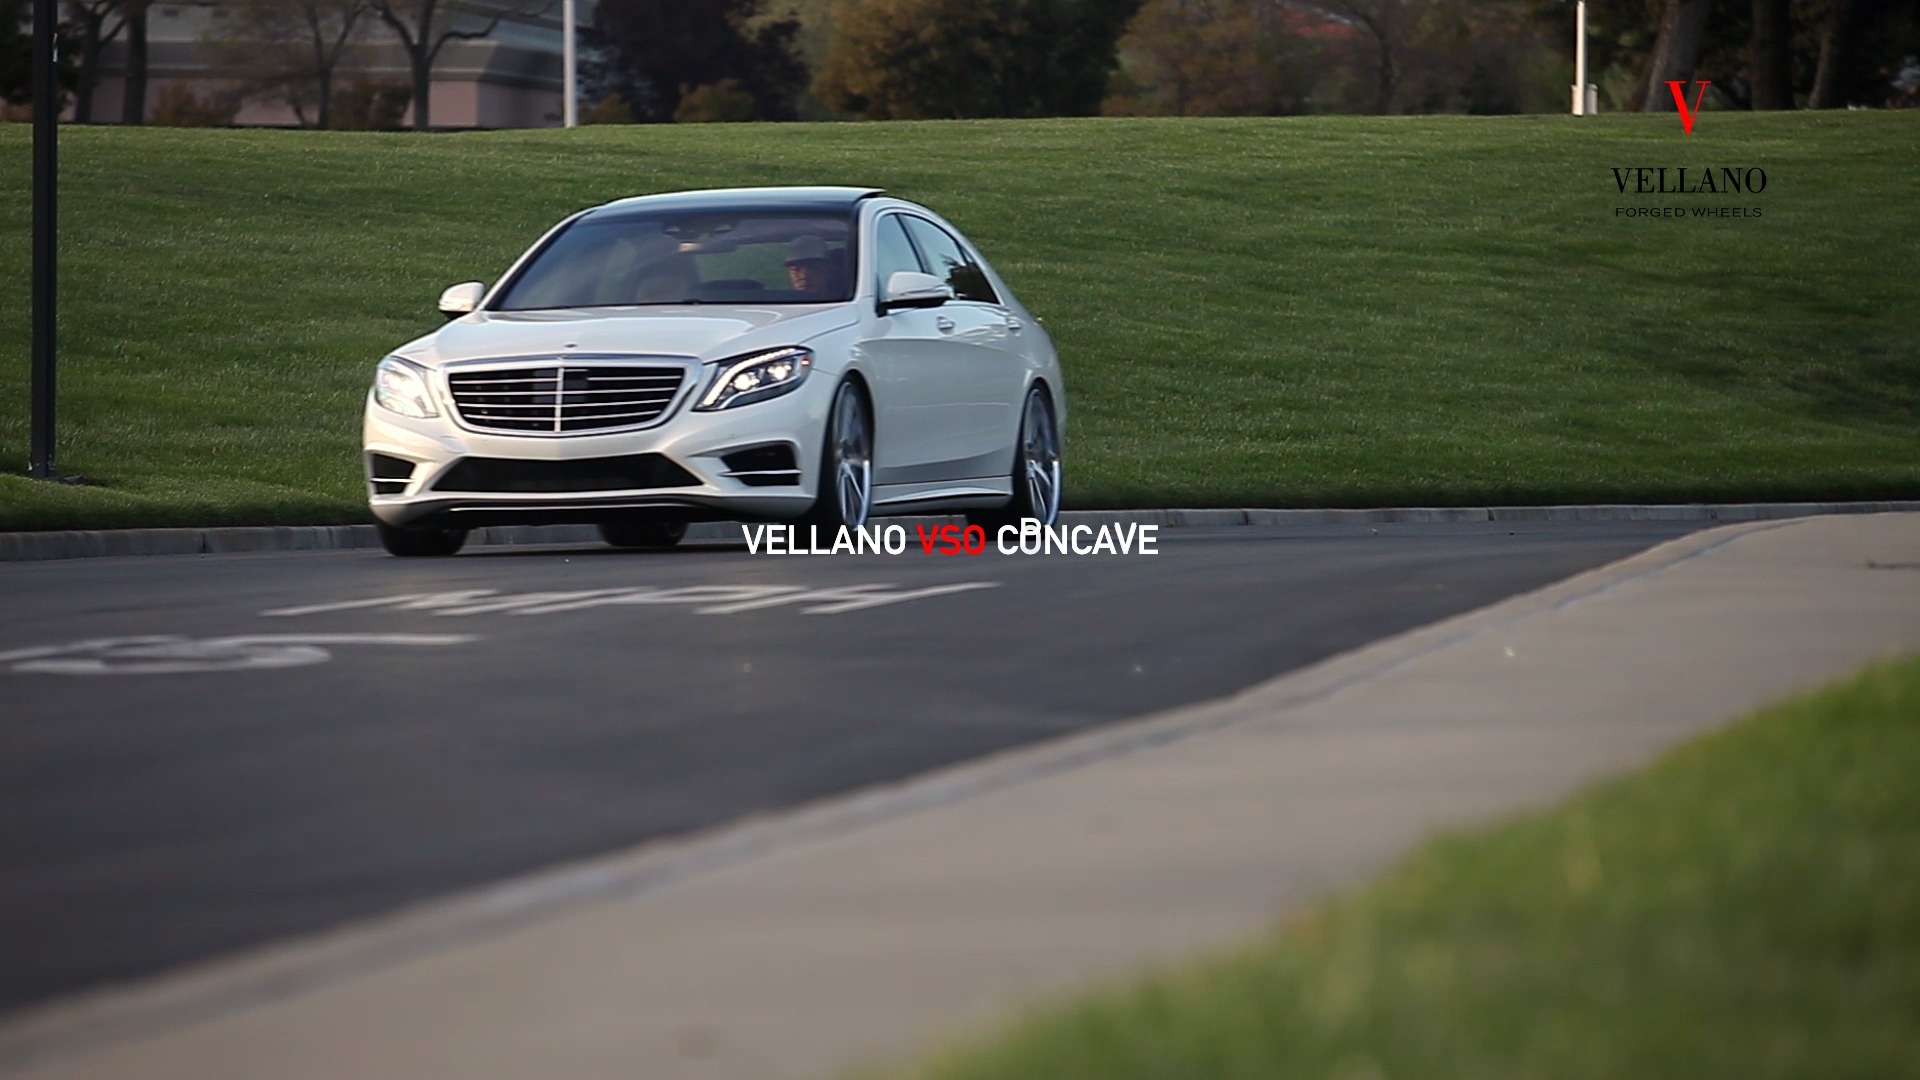 MERCEDES BENZ ON VSO CONCAVE